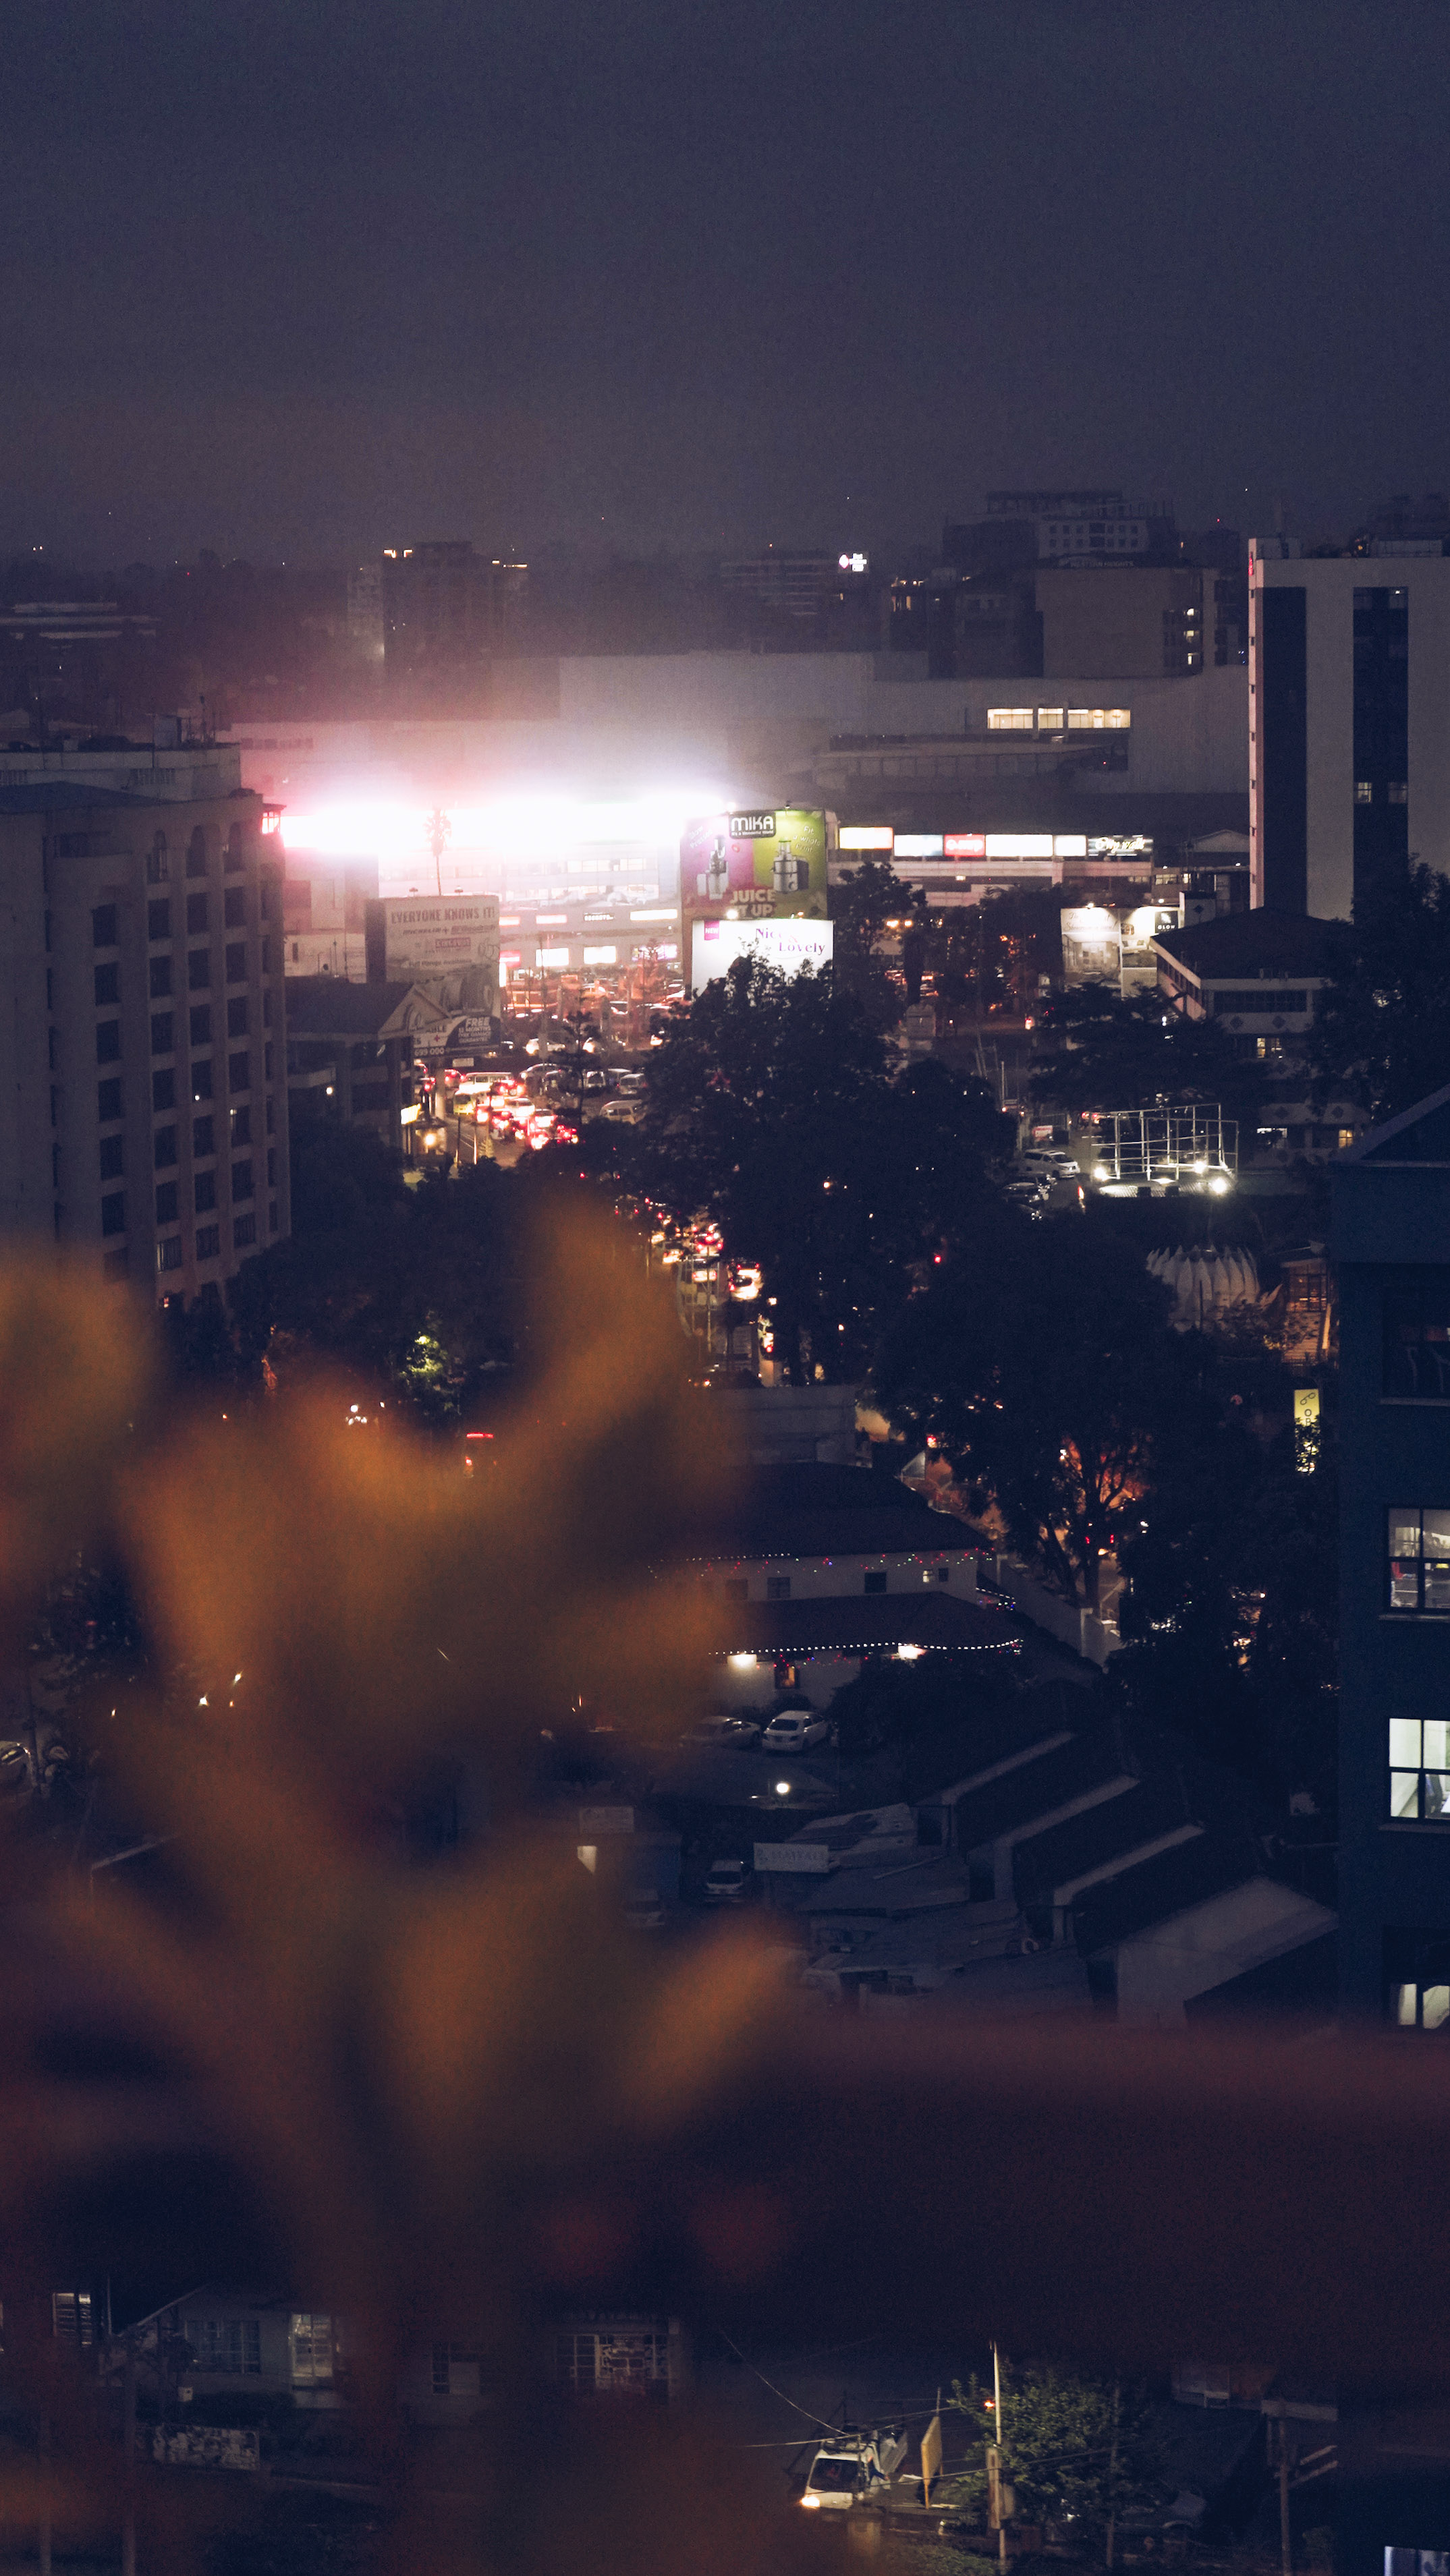 vertical panoramic photo of Nairobi featuring a blurred plant in the foreground, traffic on the street in the middle and illuminated building in the background